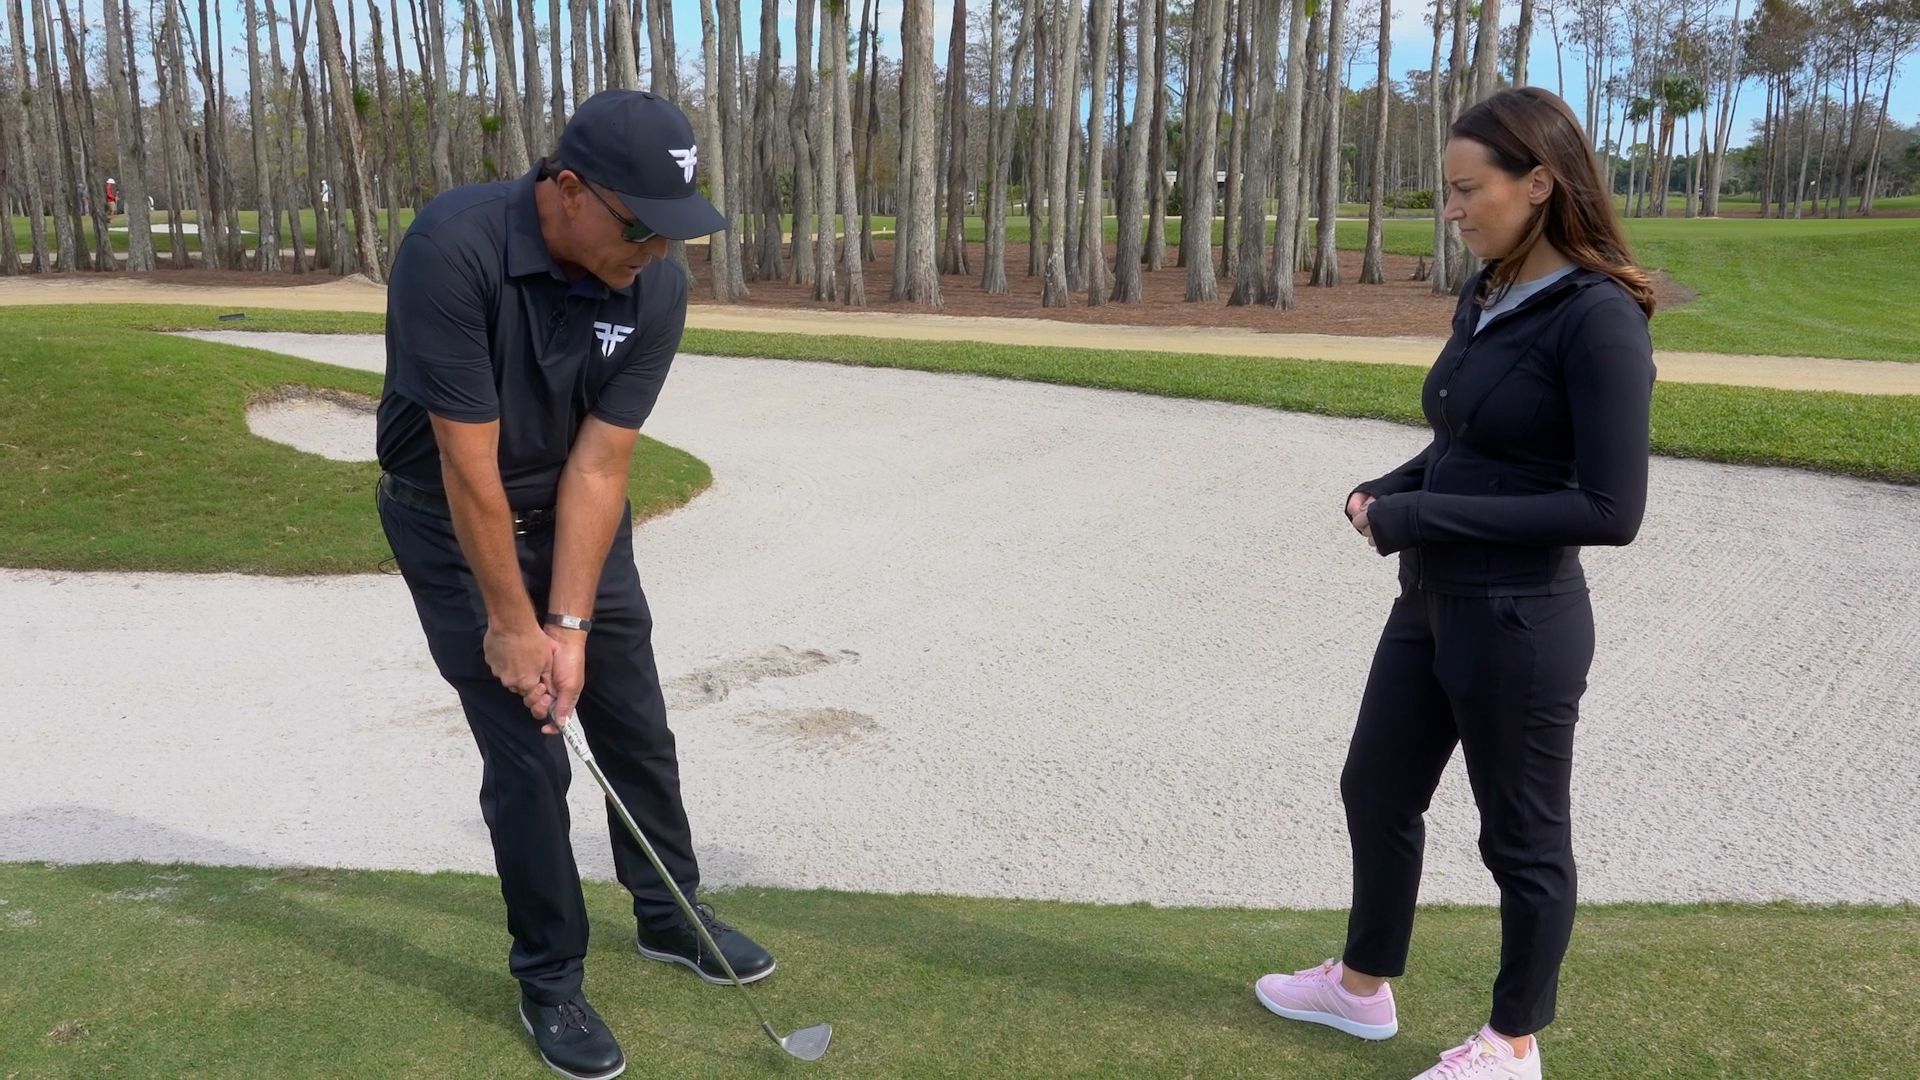 Phil Mickelson says these are the 3 fatal chipping mistakes amateurs make